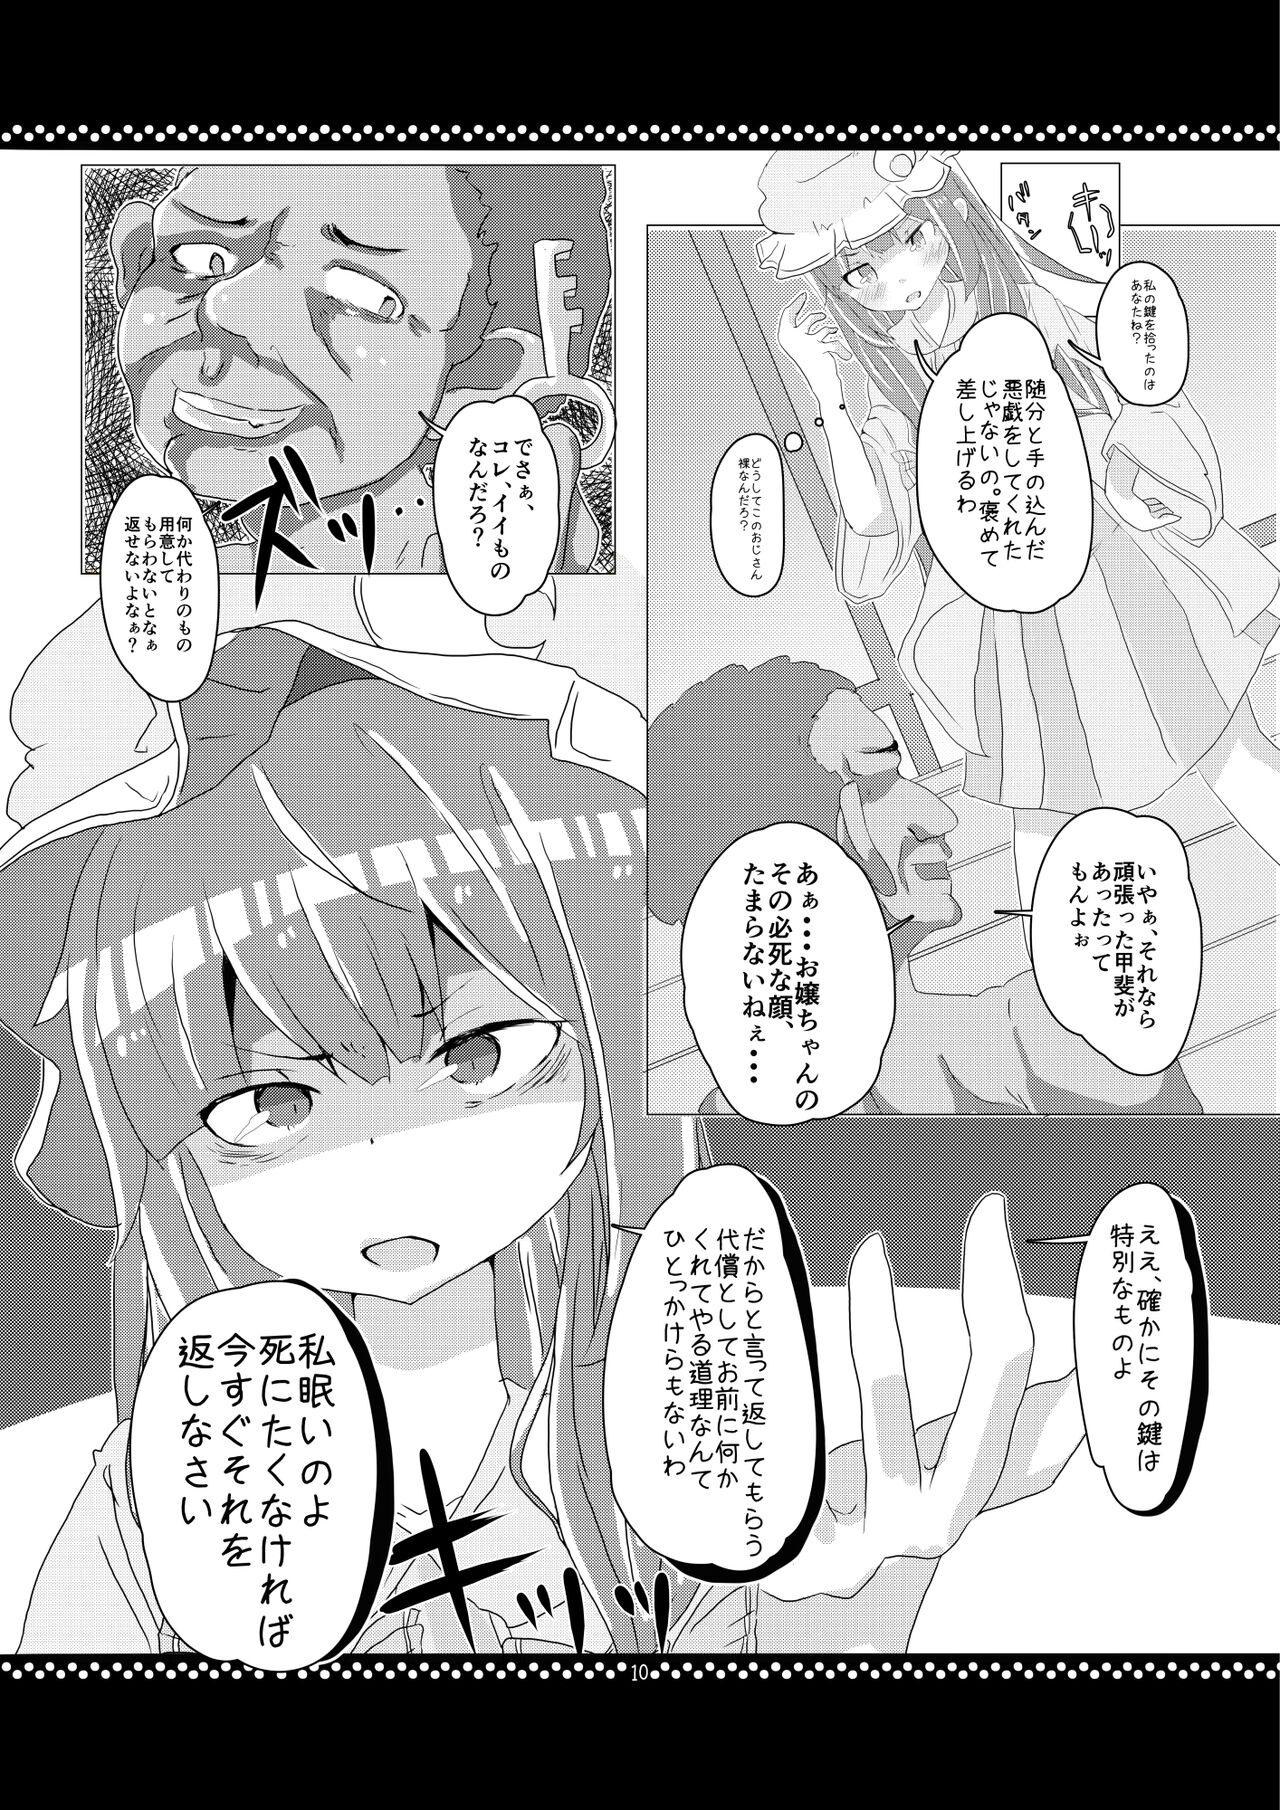 Gay Party 従順？パチュリーさま！ - Touhou project Phat - Page 9